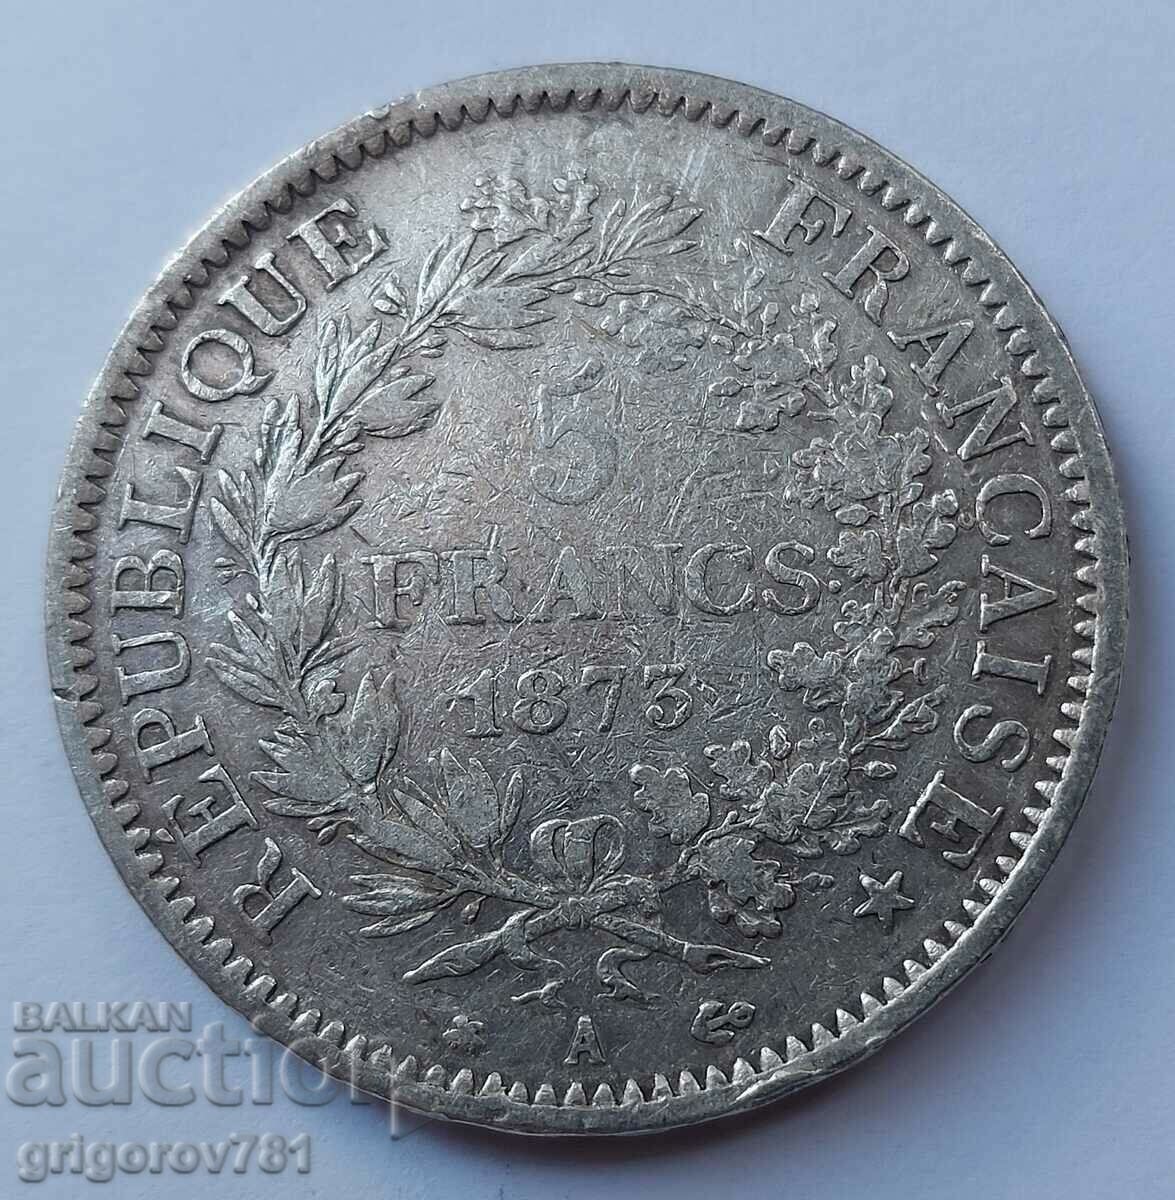 5 francs silver France 1873 - silver coin # 44